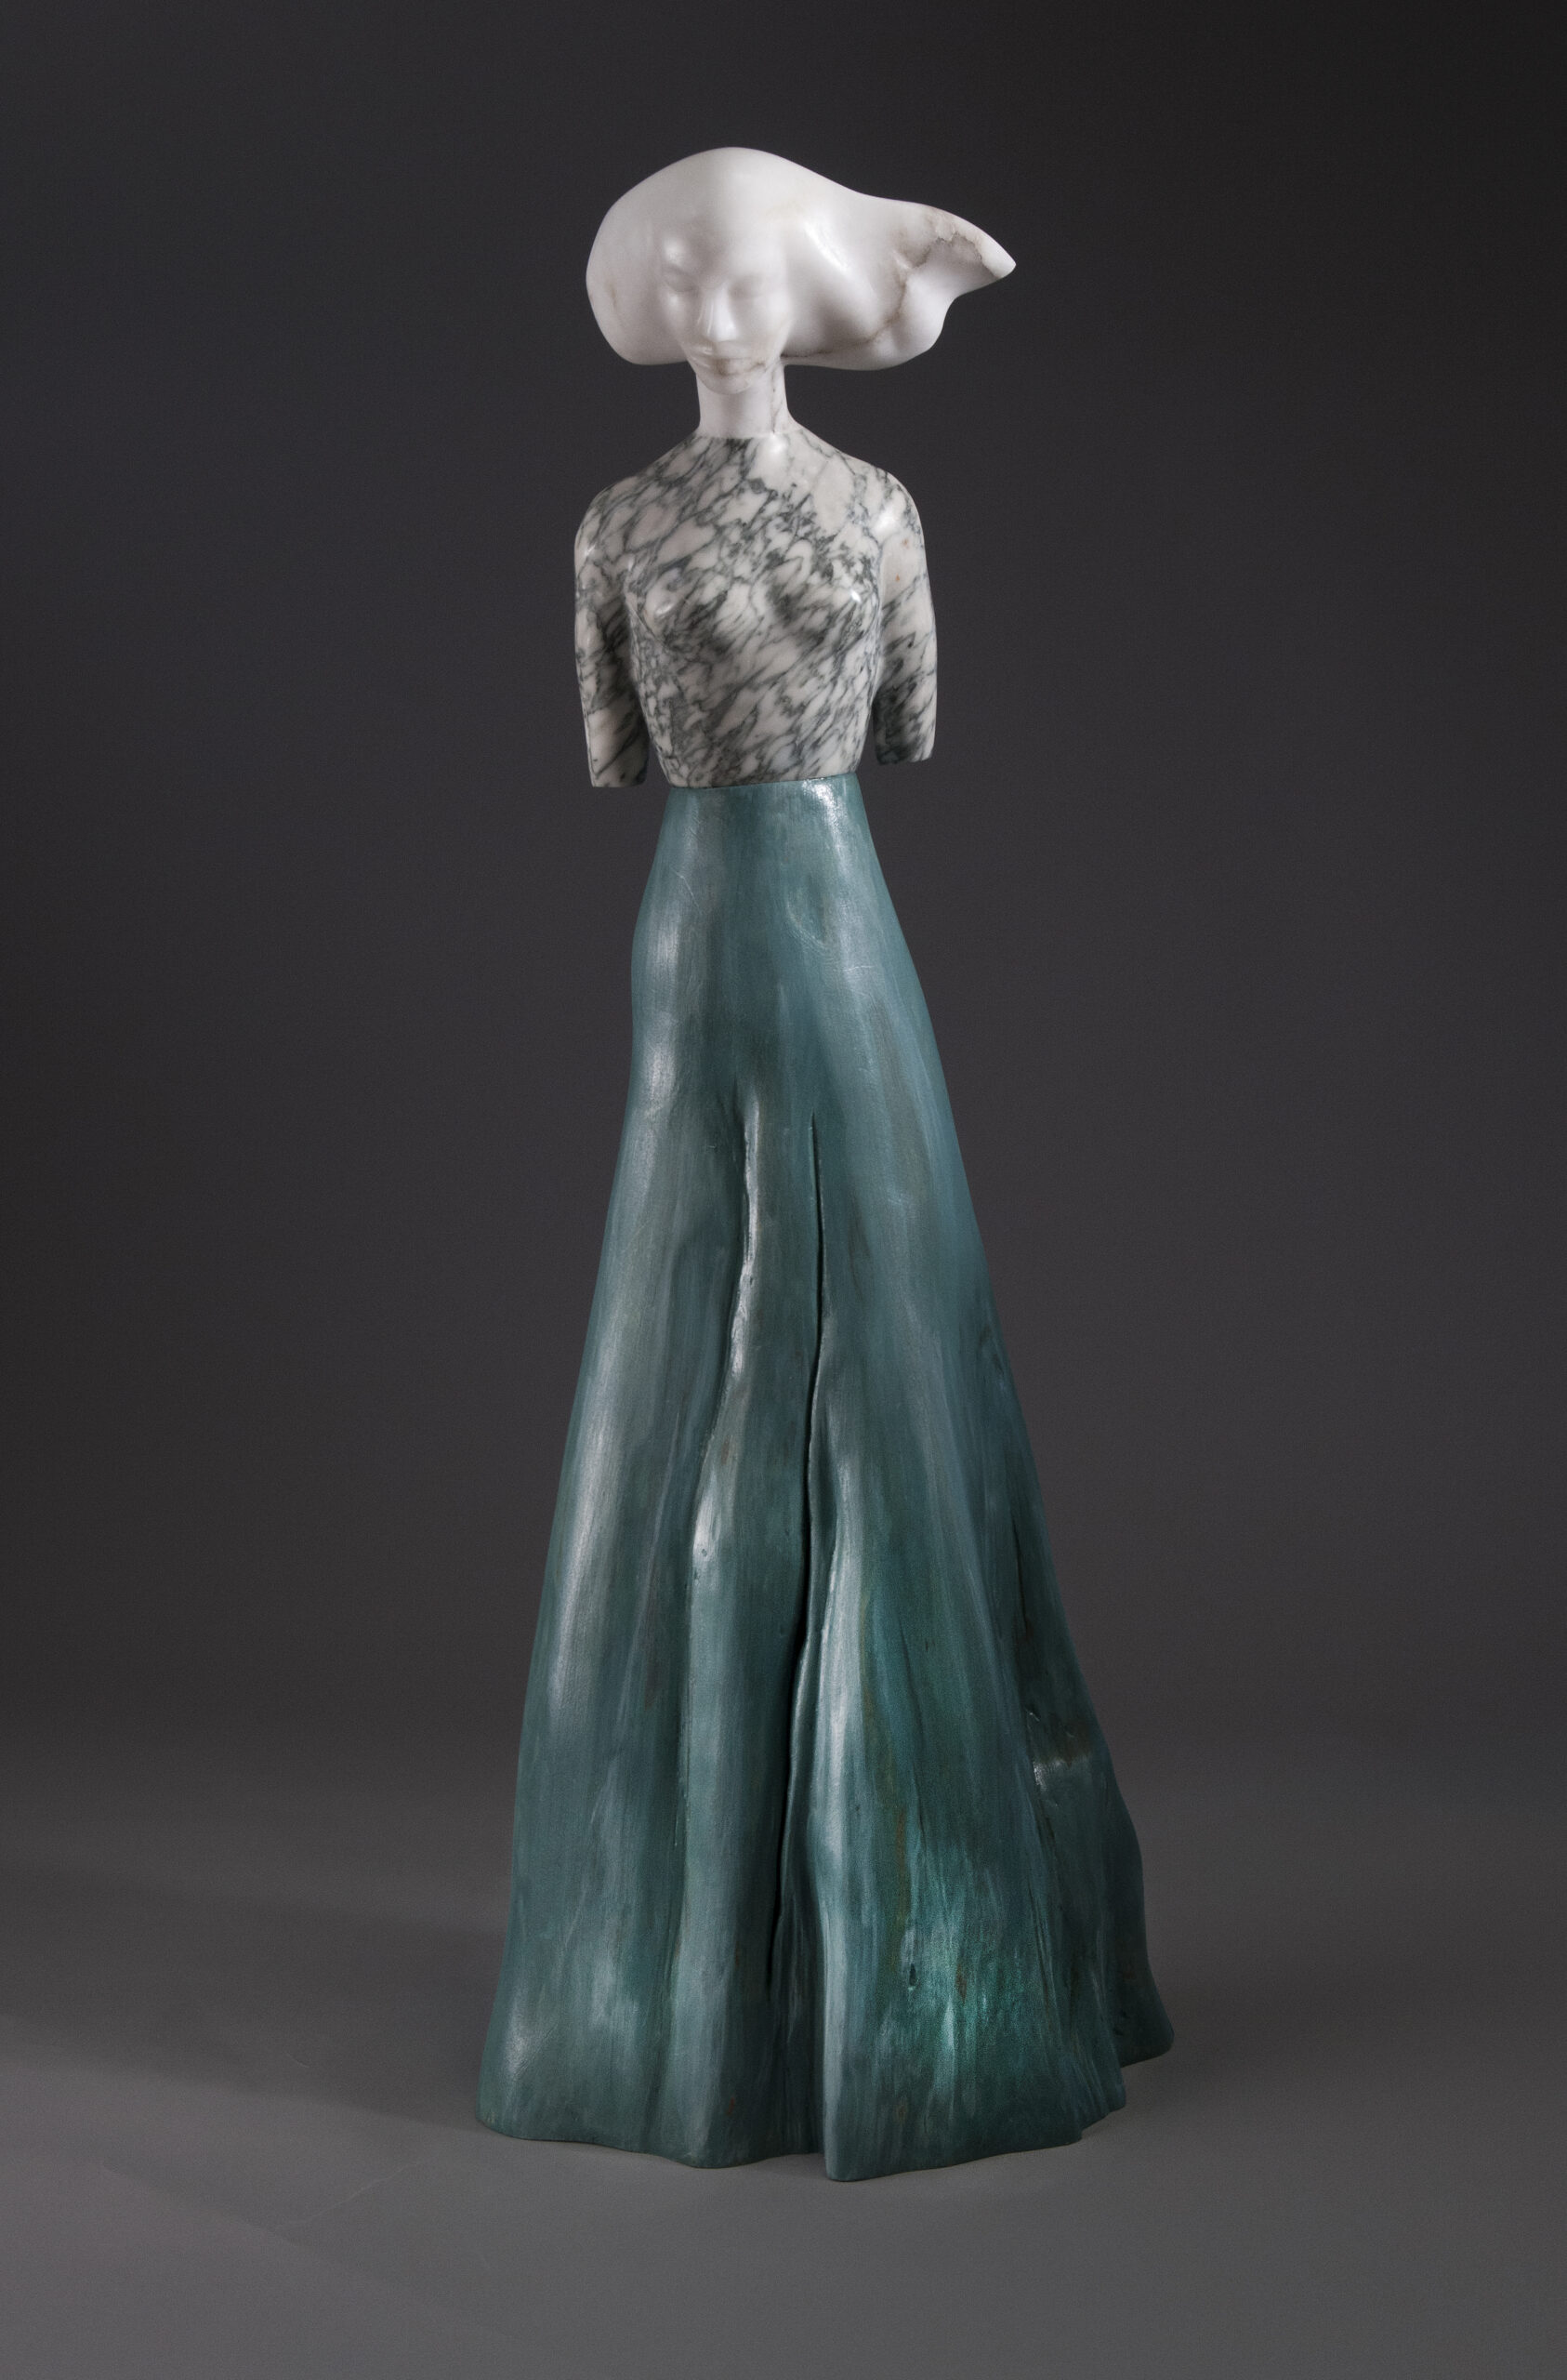 A statue of a woman in a long dress